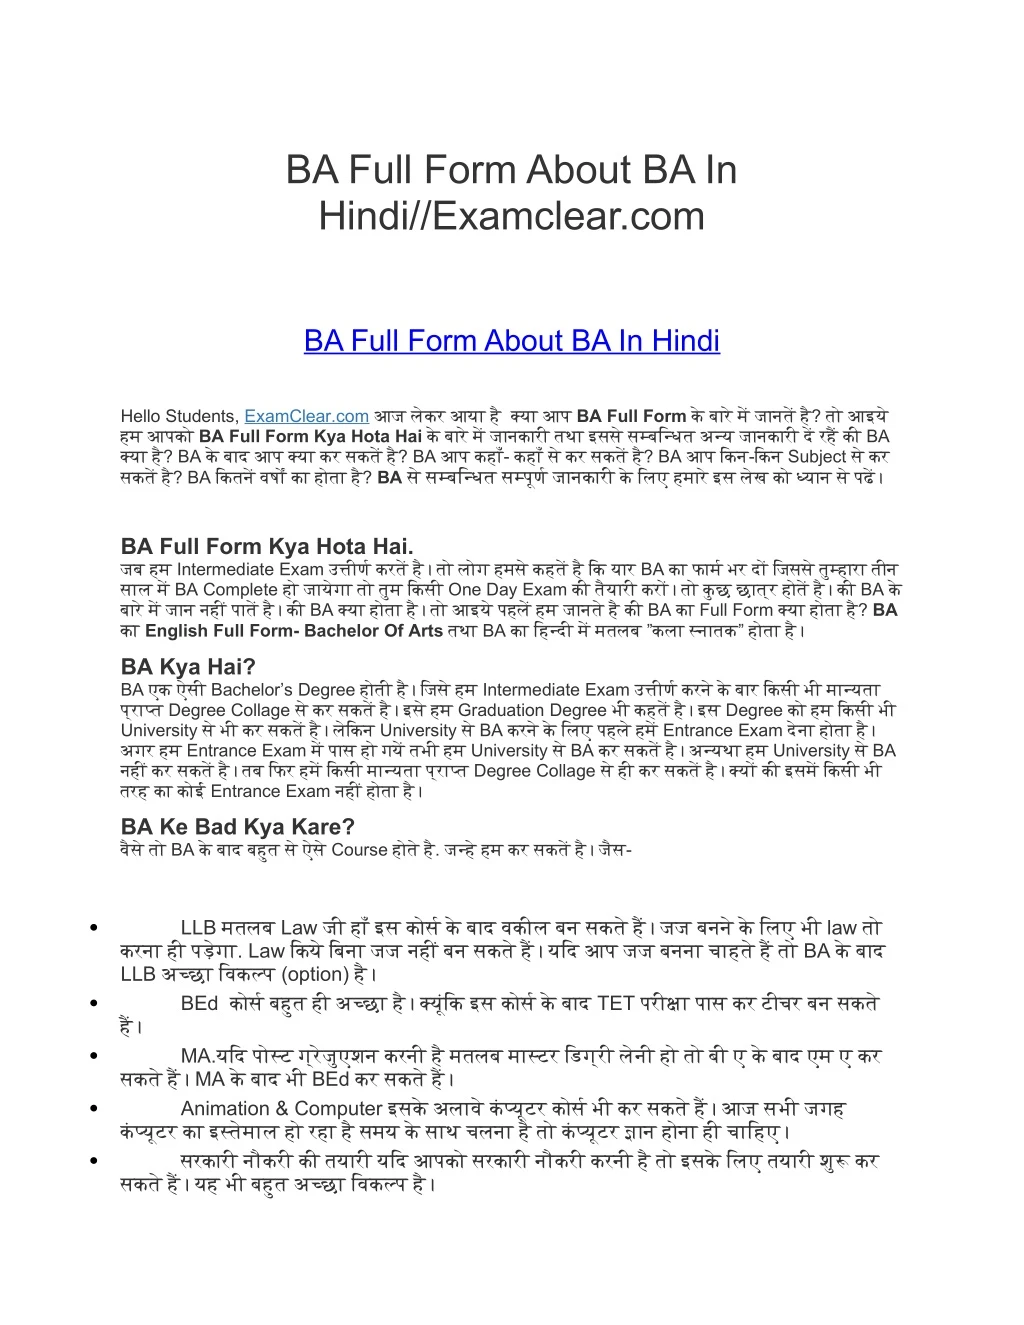 ba full form about ba in hindi examclear com